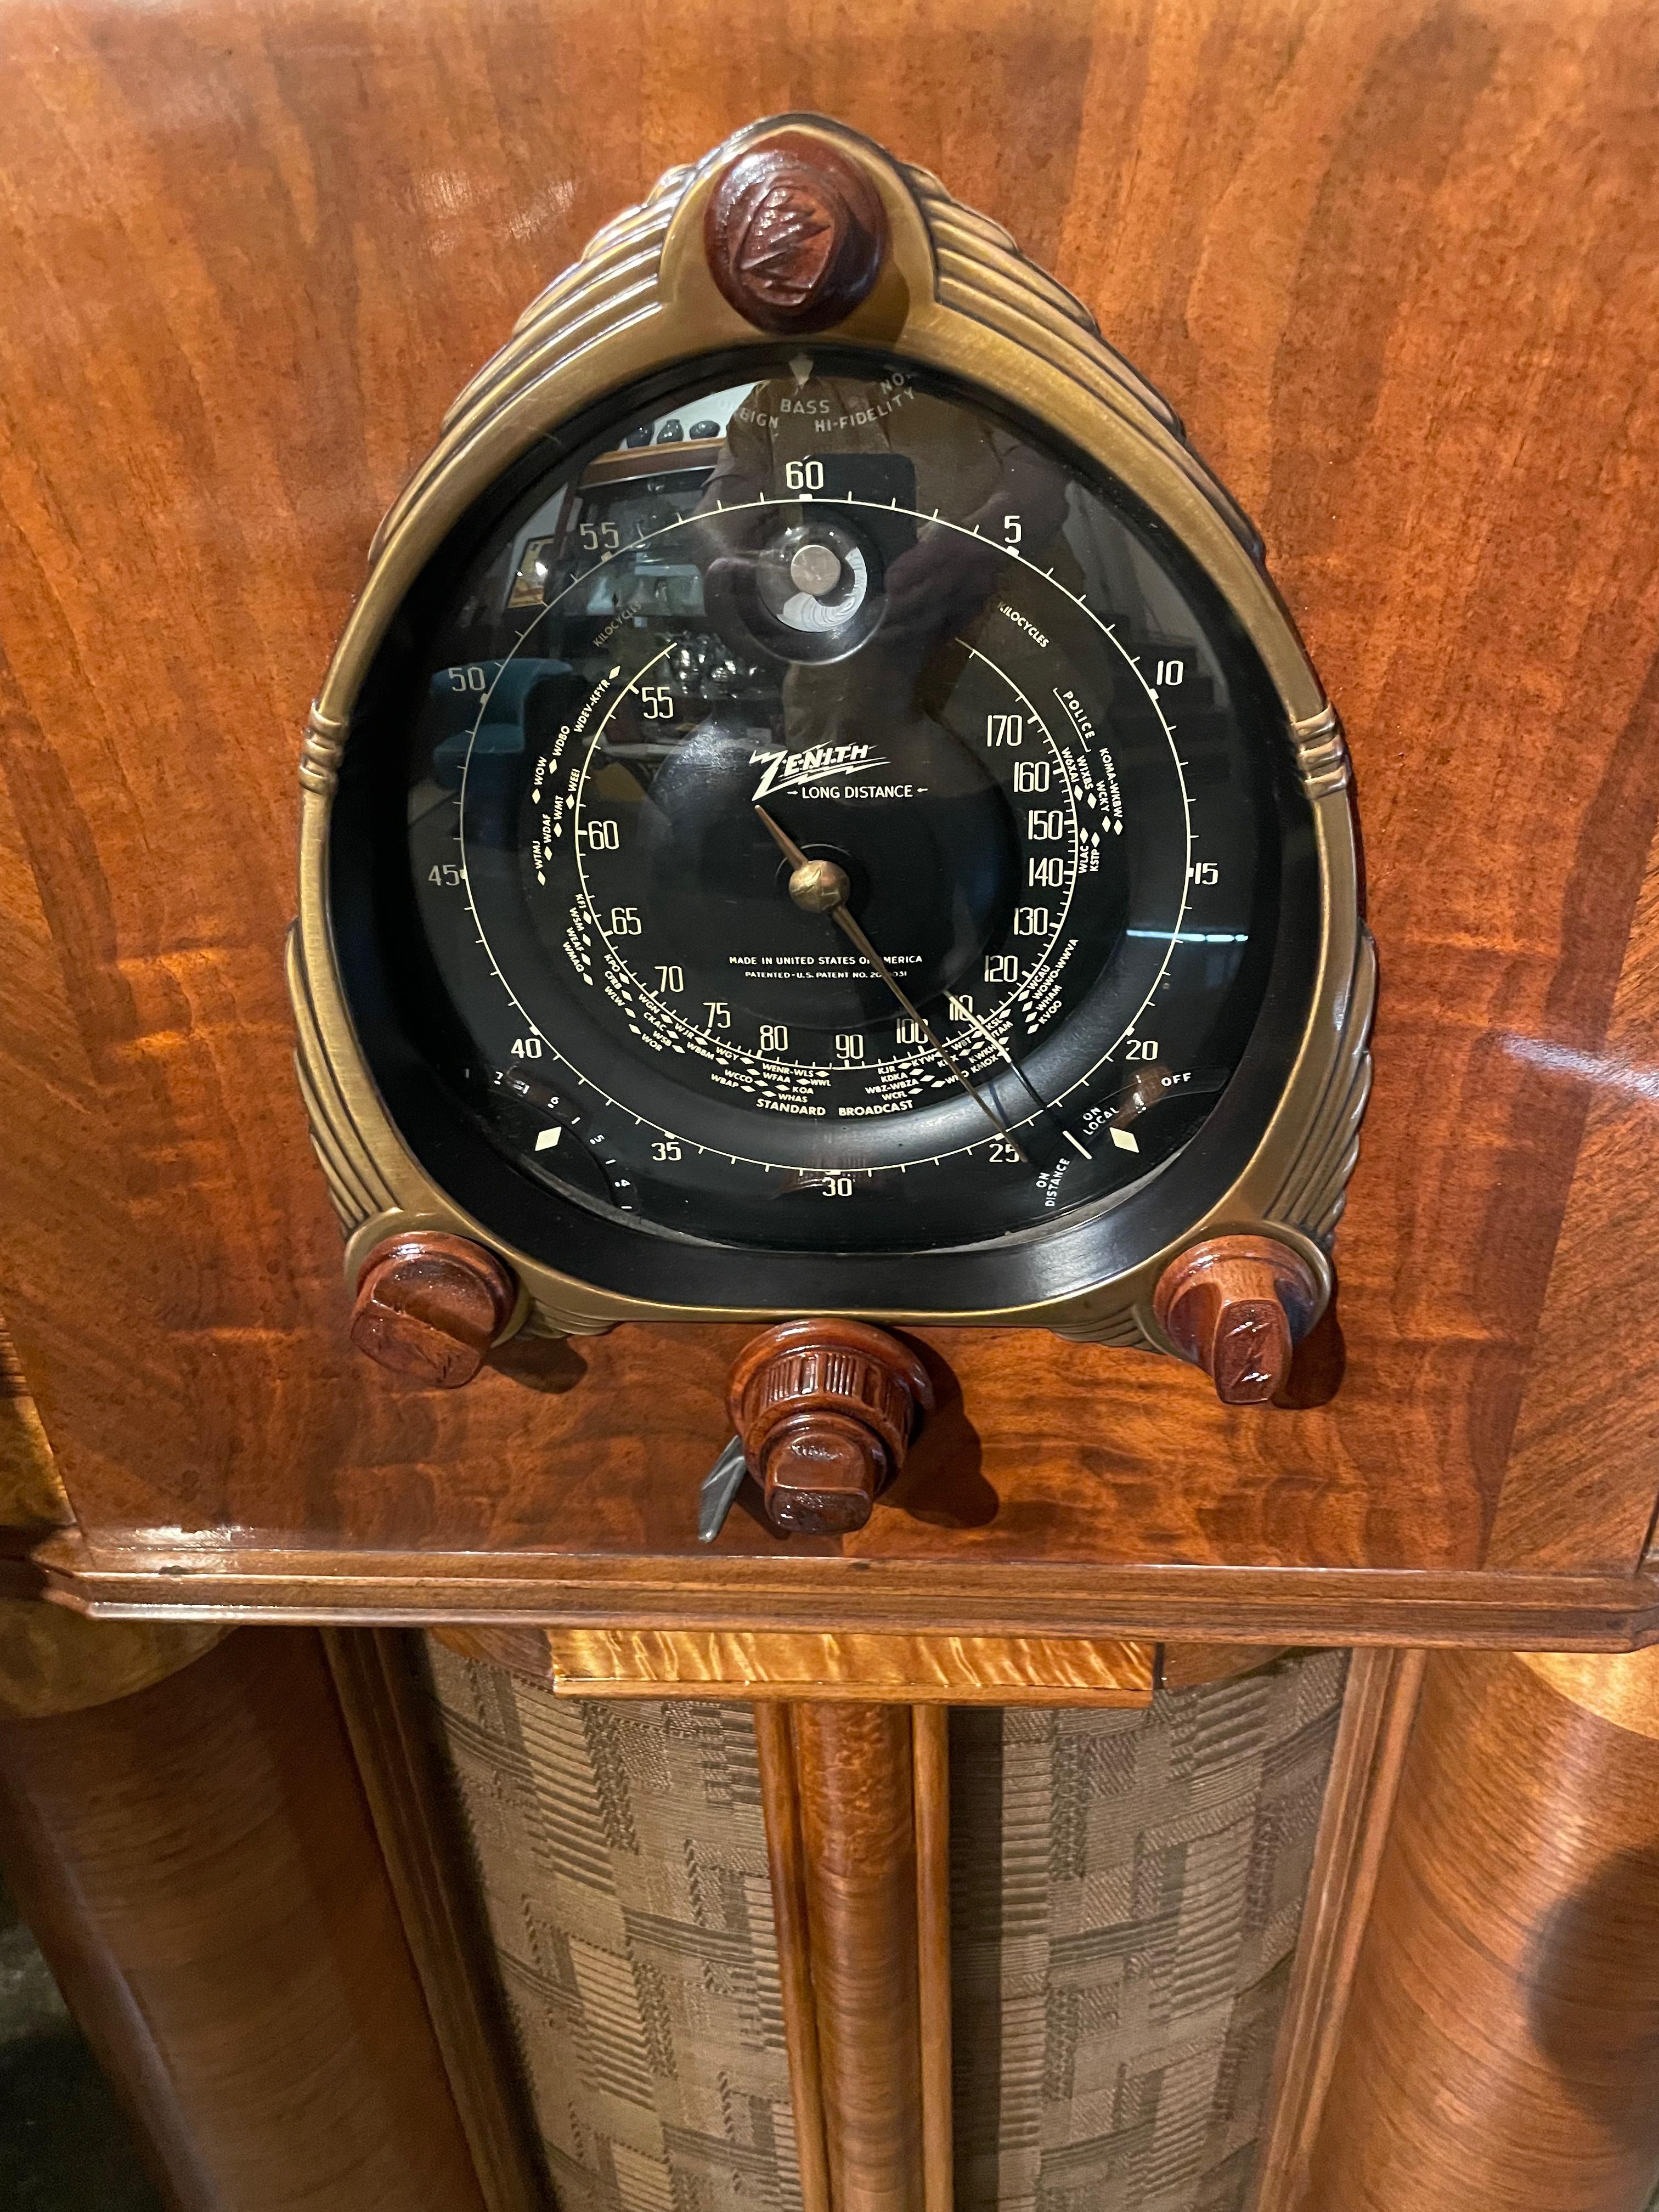 This is a 1938 Zenith 12 tube model 12S265, Zenith’s most famous and collectible year. It is sporting the fabulous “Motor Drive Robot Shutter Dial” and green tuning eye. The large black dial is in very nice shape. The cabinets’ book-matched walnut